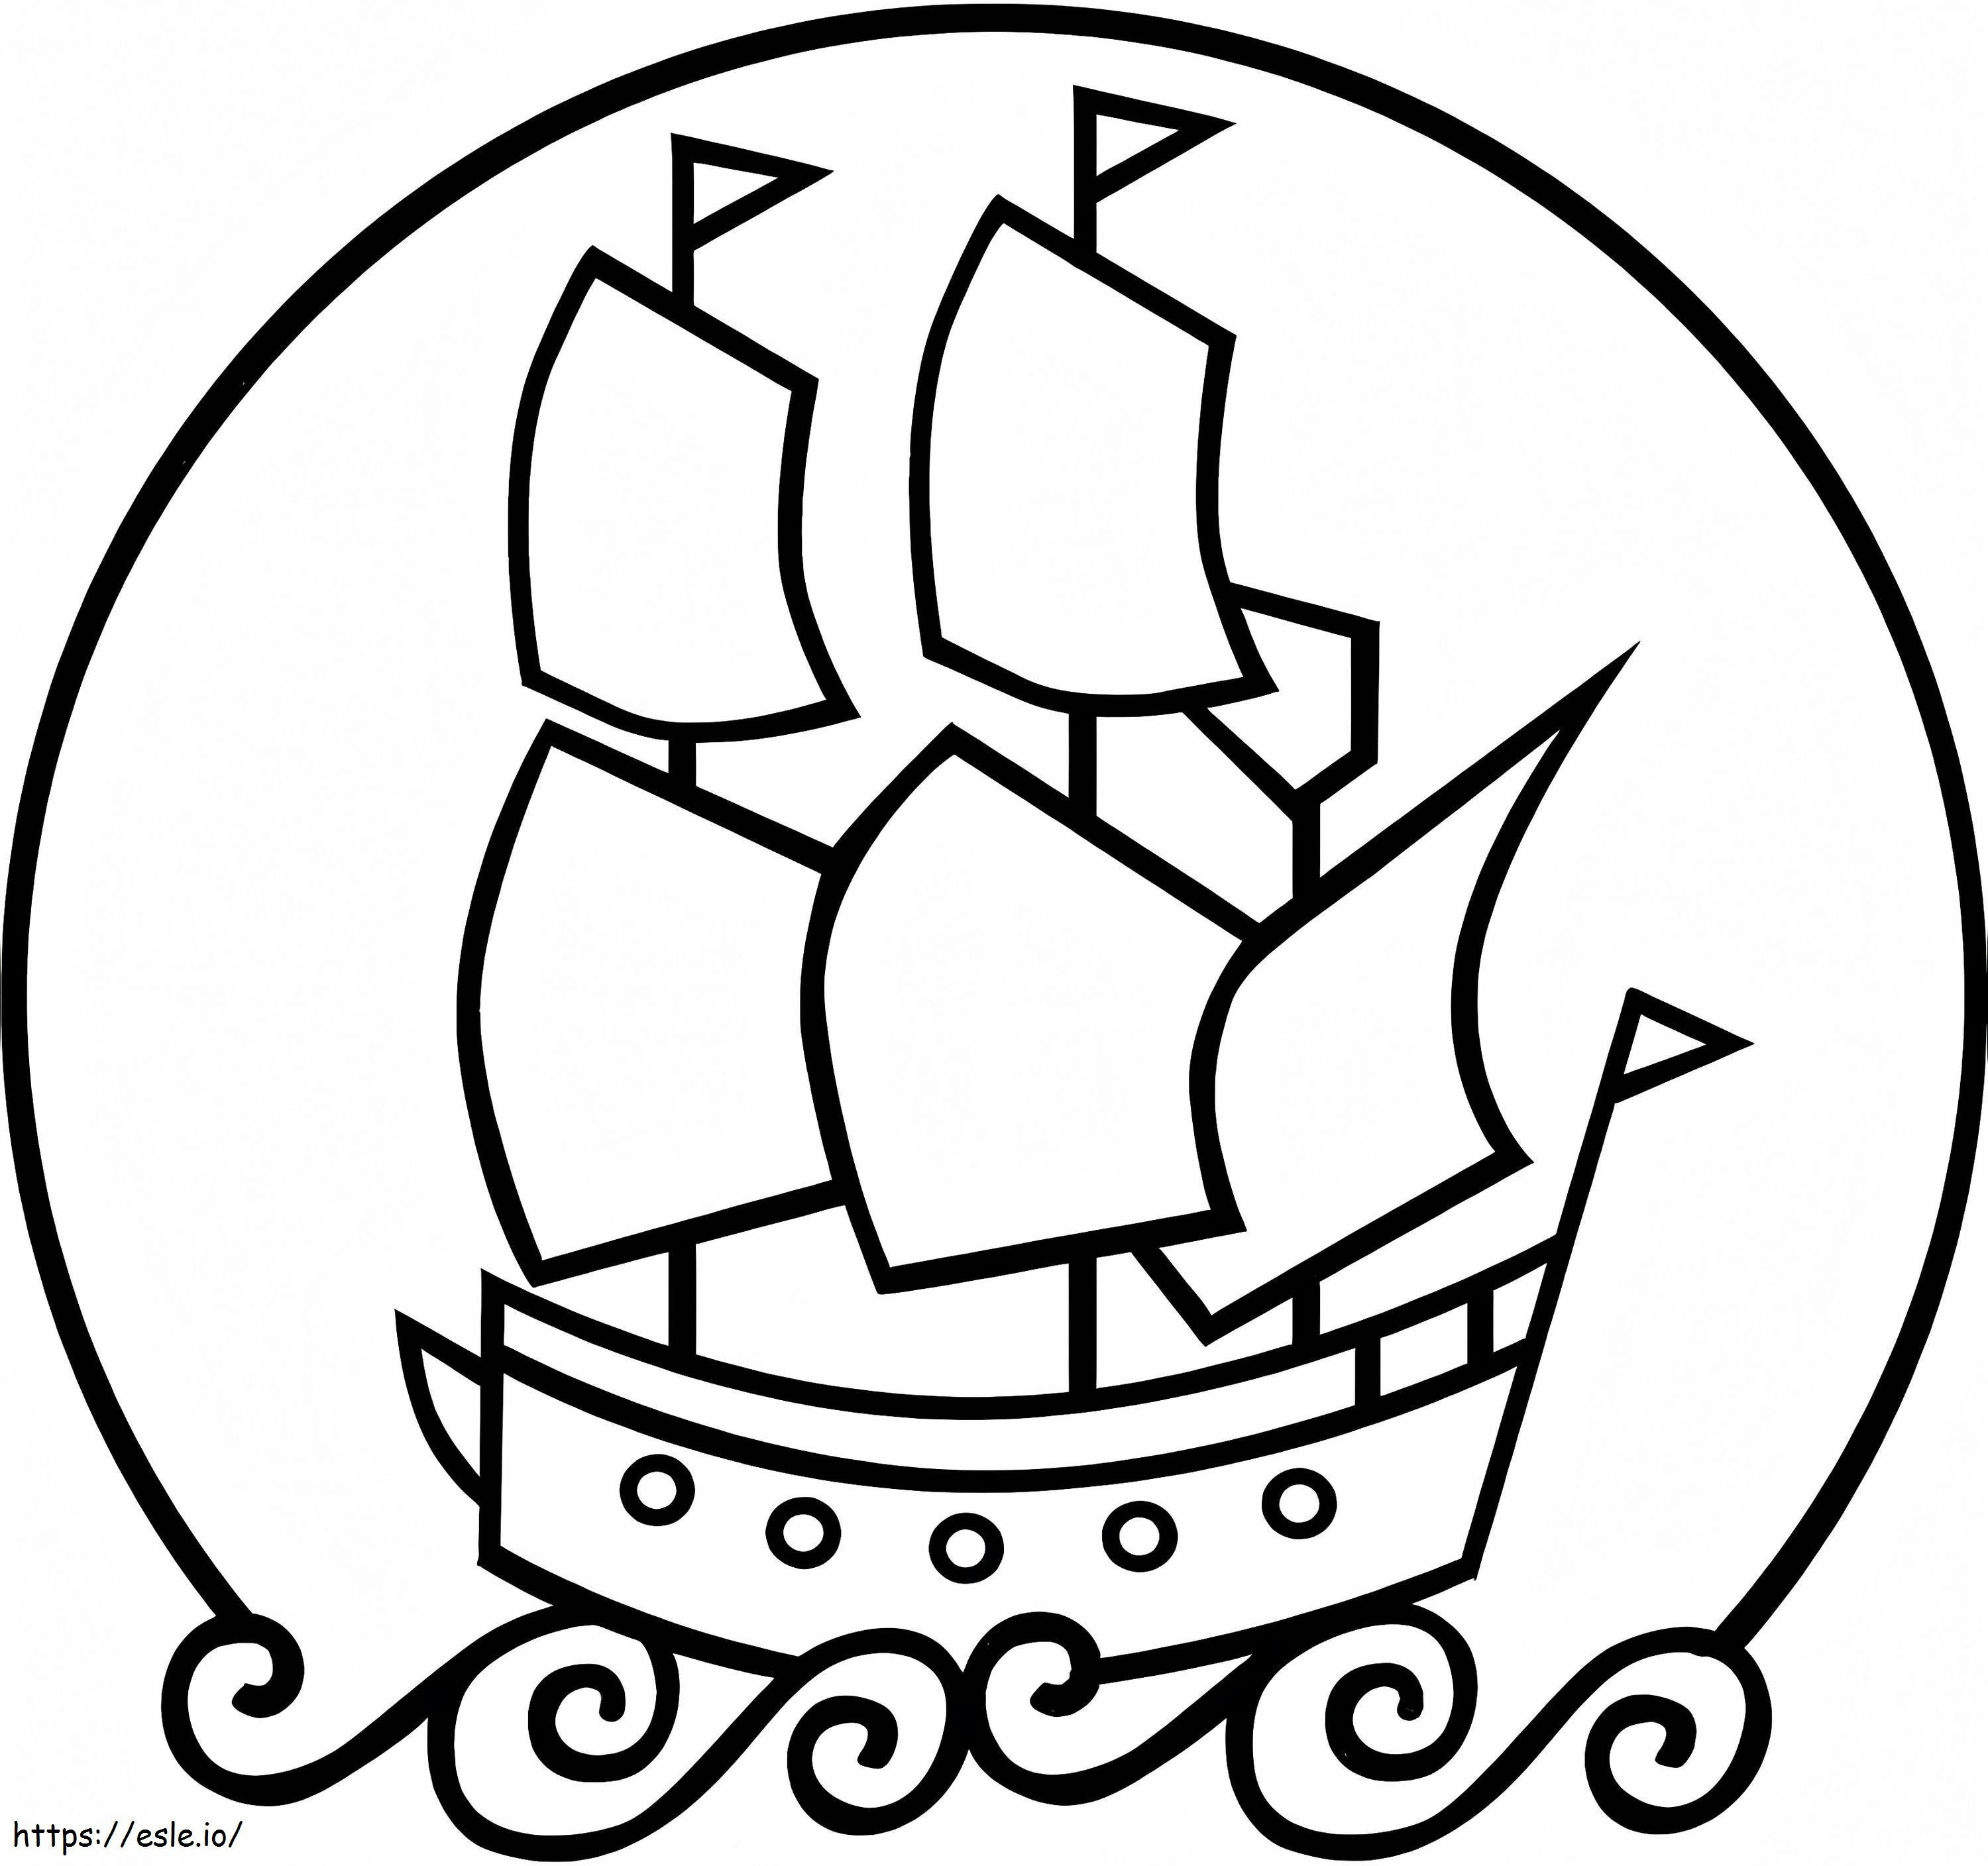 Simple Mayflower coloring page